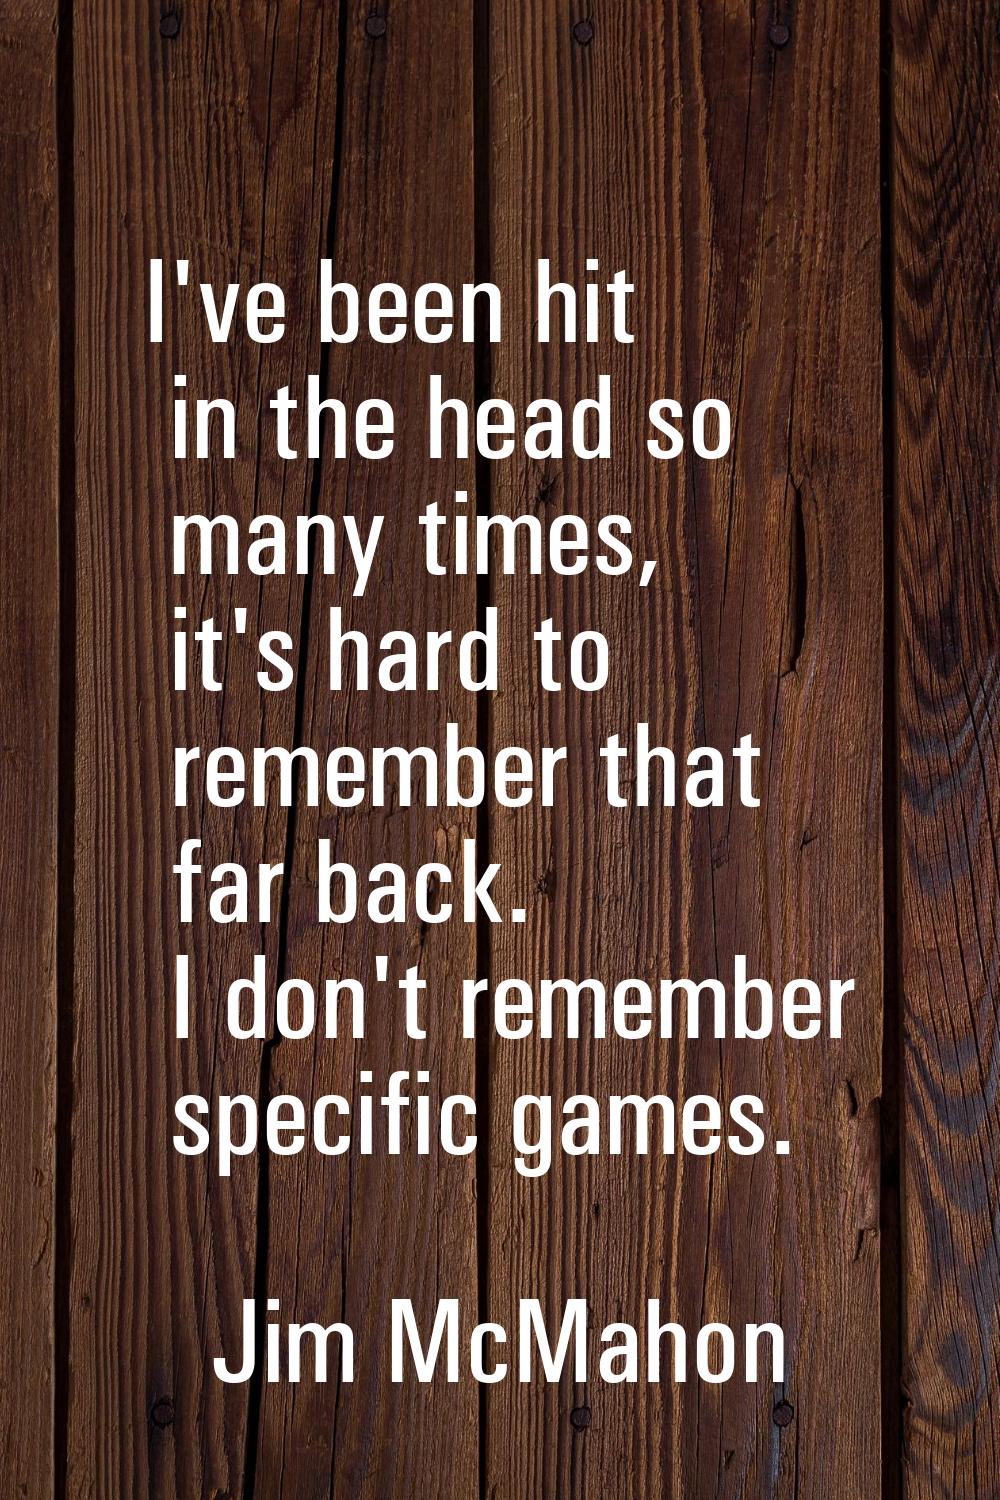 I've been hit in the head so many times, it's hard to remember that far back. I don't remember spec